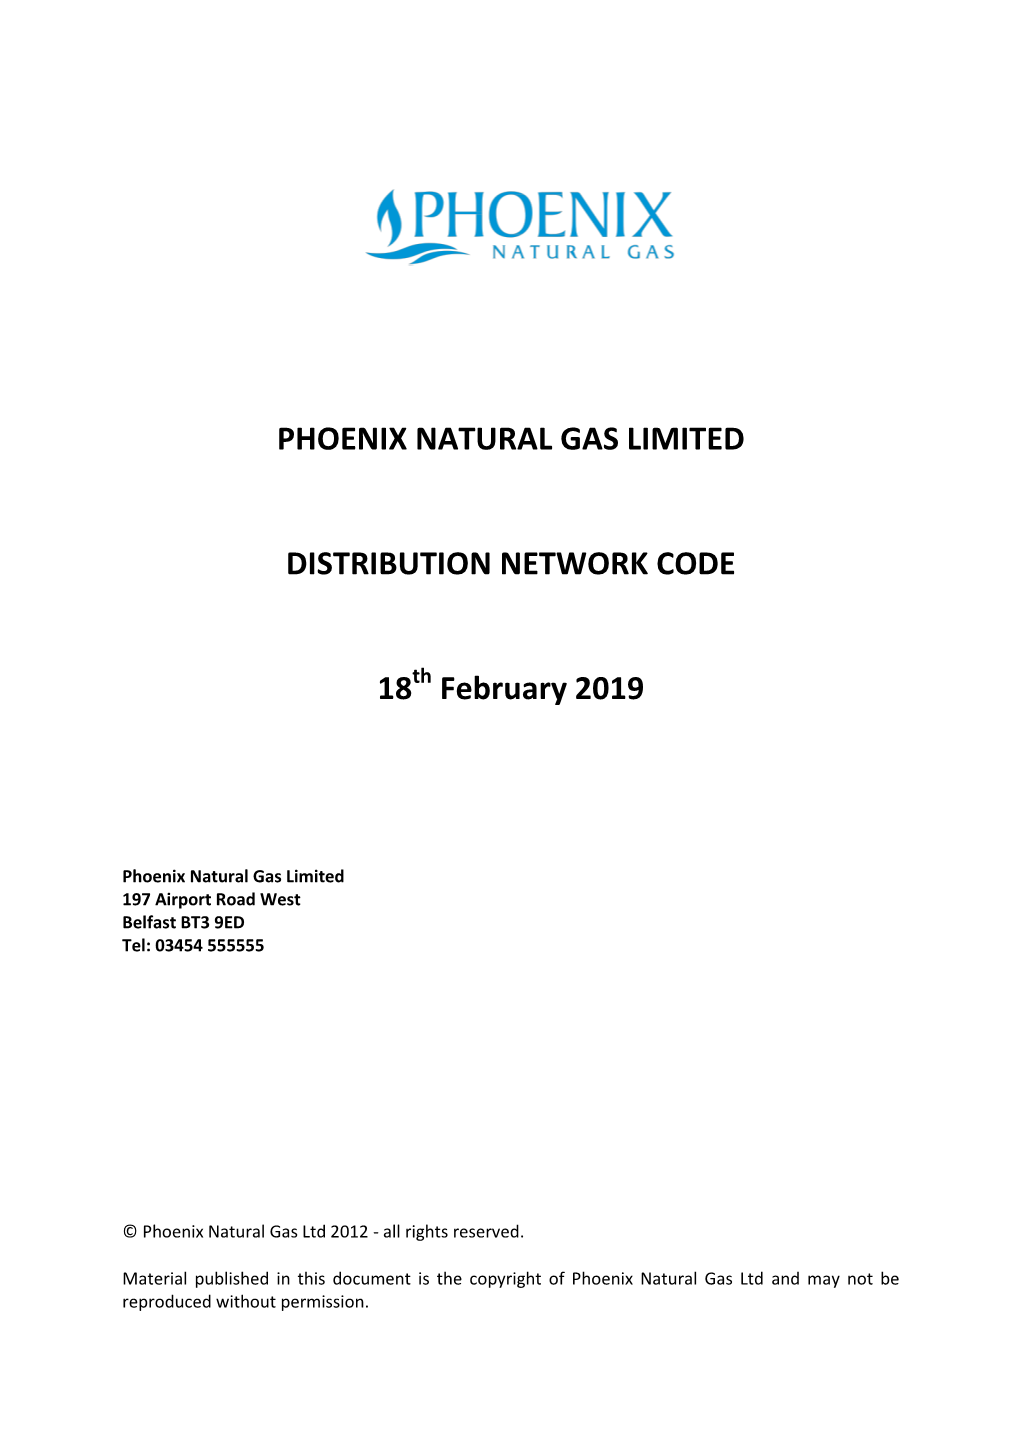 Phoenix Natural Gas Limited Distribution Network Code 18